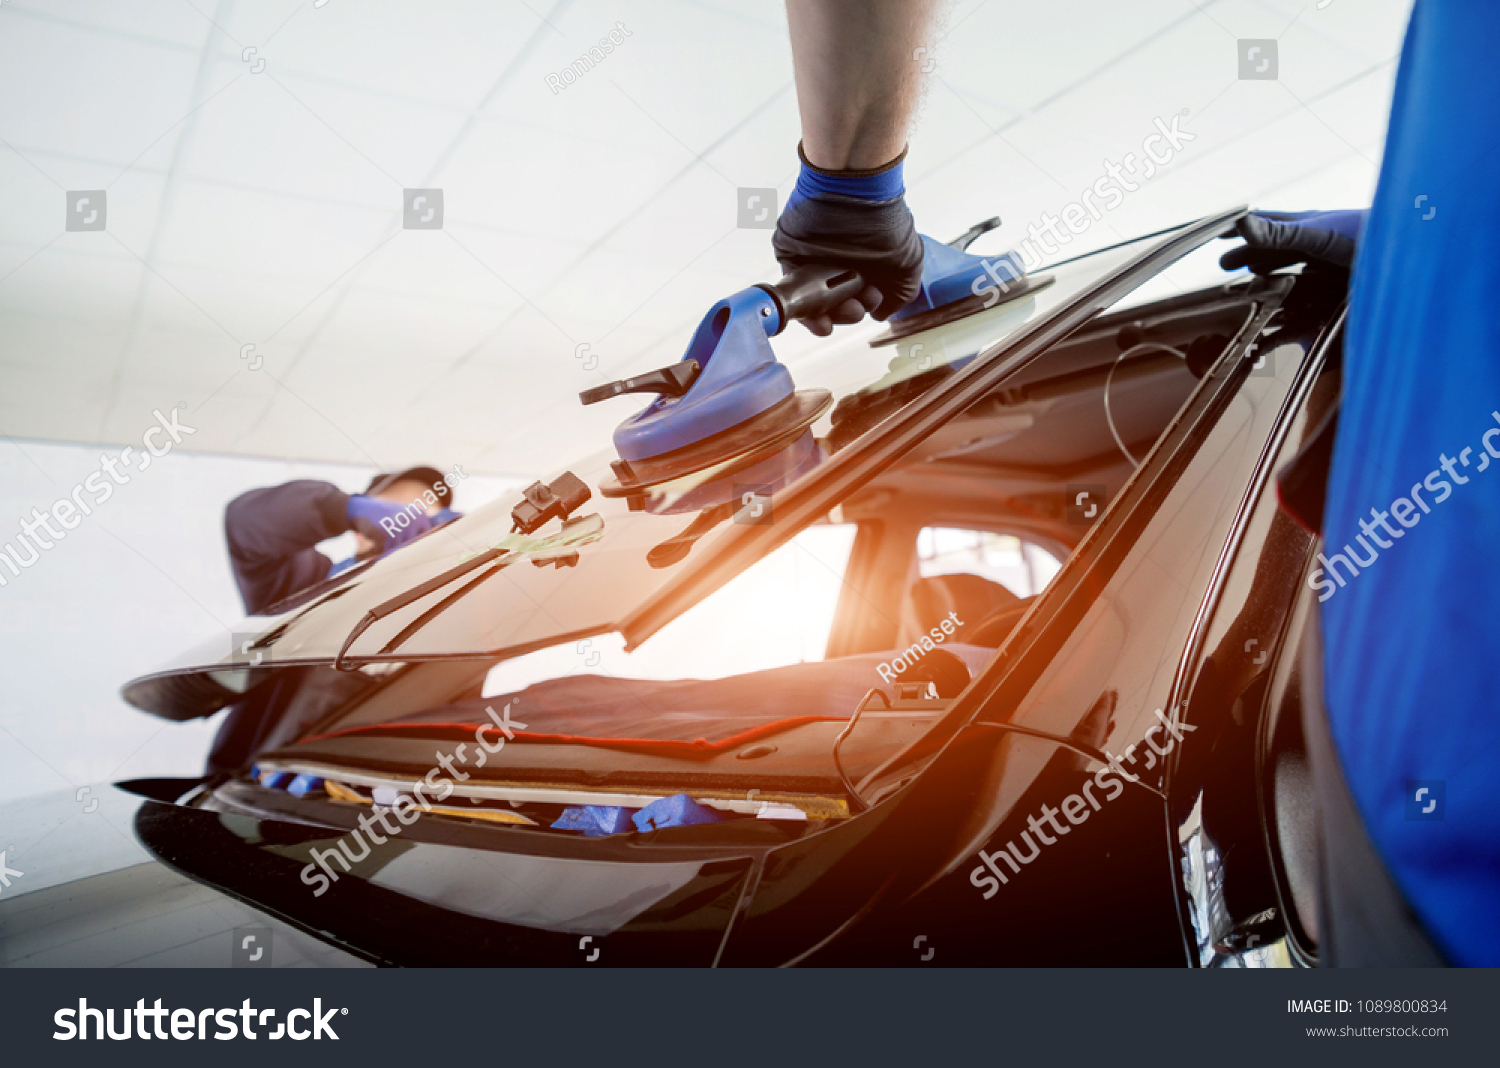 Automobile special workers replacing windscreen or windshield of a car in auto service station garage. Background #1089800834